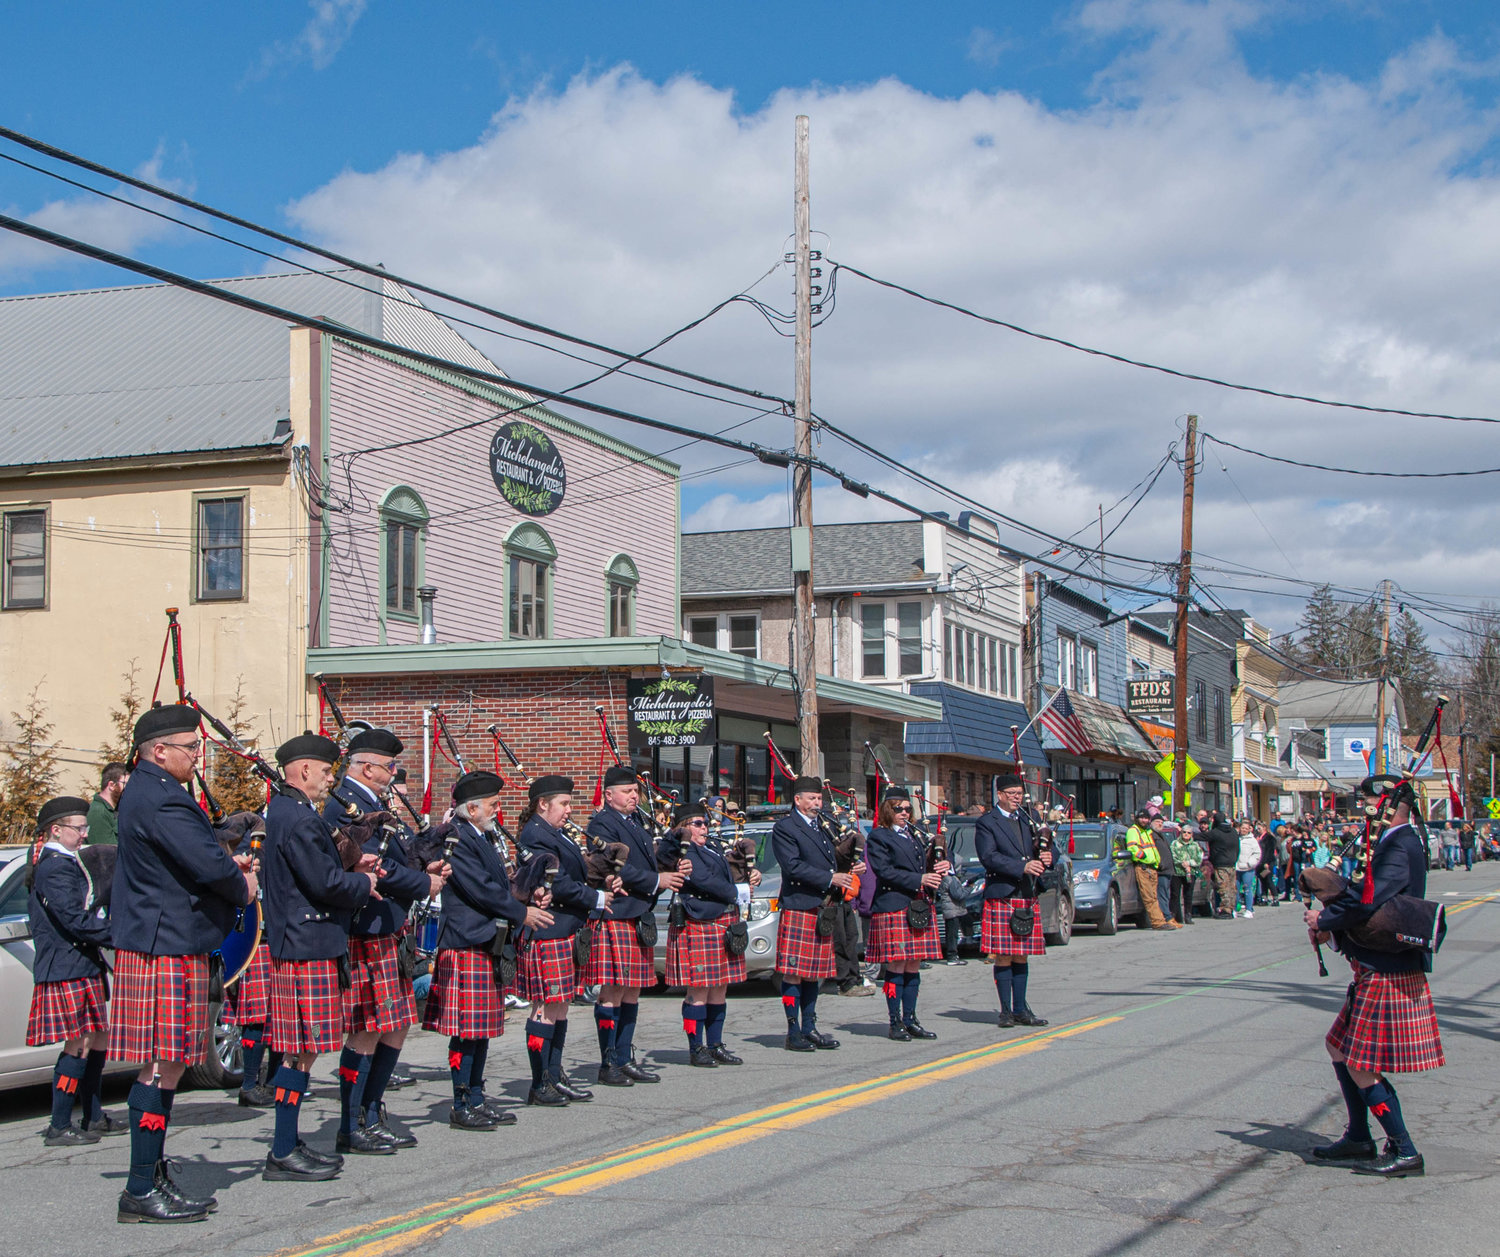 I photographed the heck out of the kids, the floats  and the oh-so-fantastic Firefighter McPadden Pipes and Drums Corps from Goshen, NY, so be sure to check out the pics on our Facebook page.